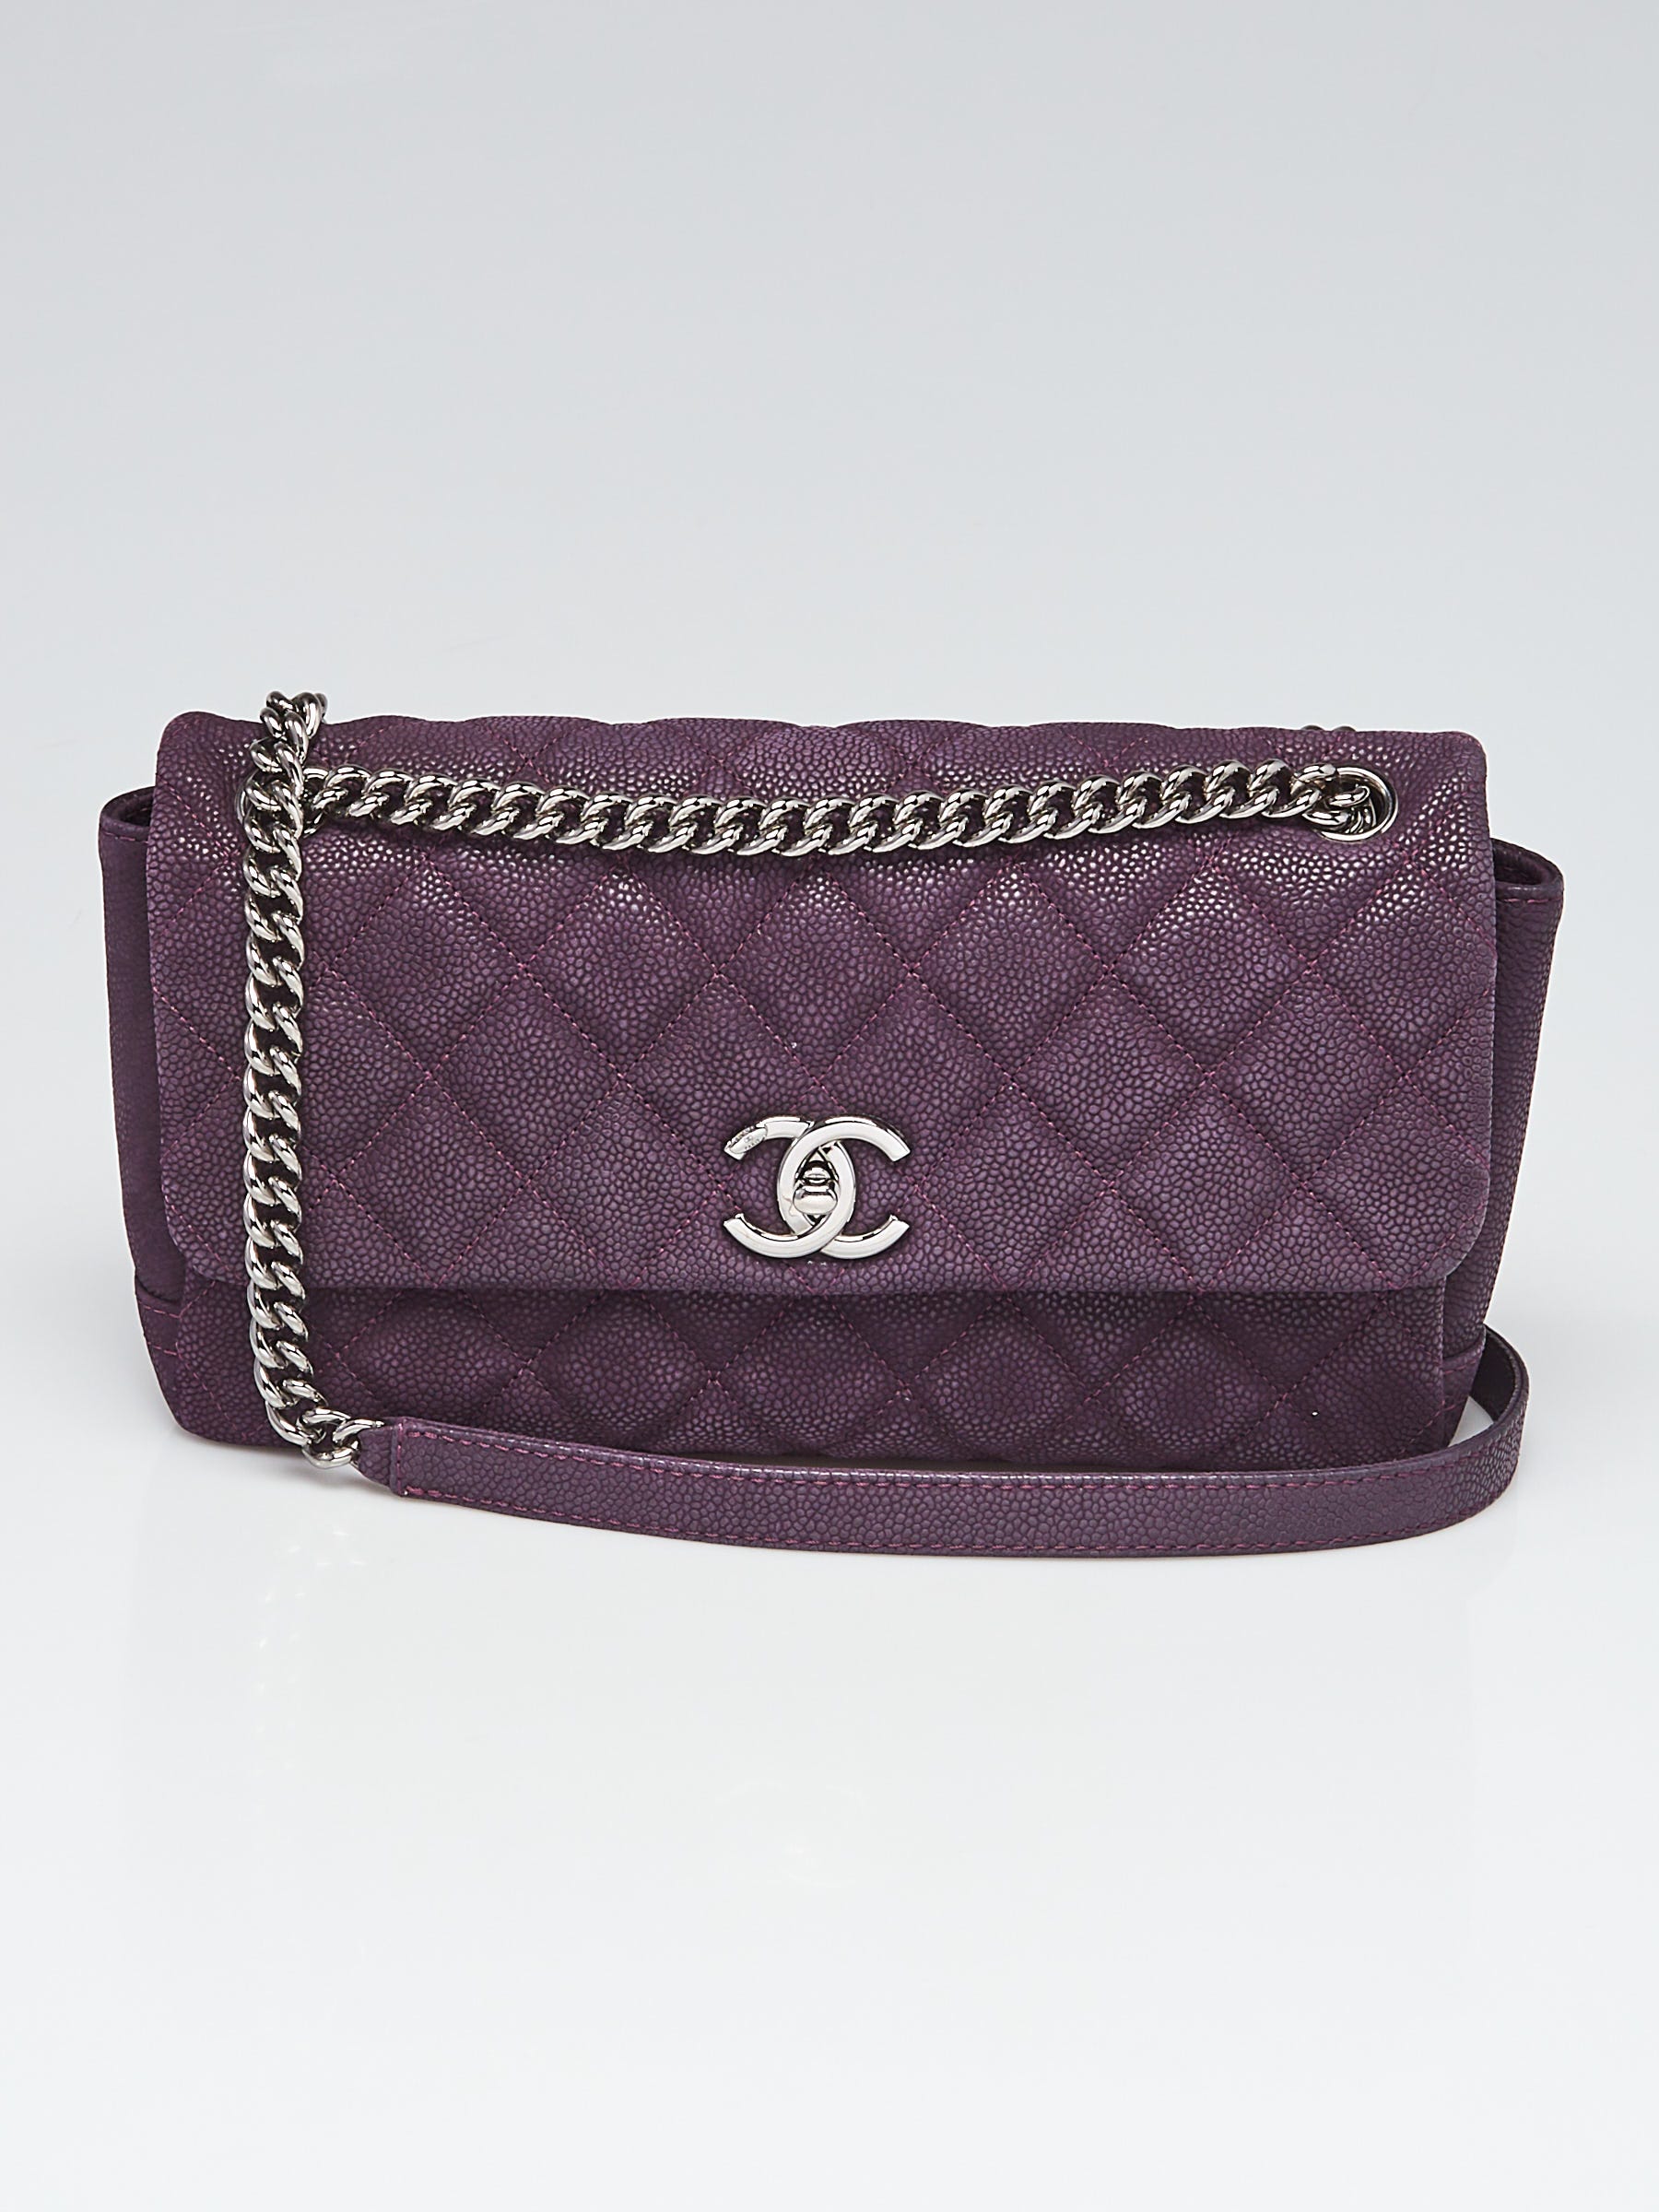 Chanel Dark Purple Matte Quilted Caviar Leather Lady Pearly Flap